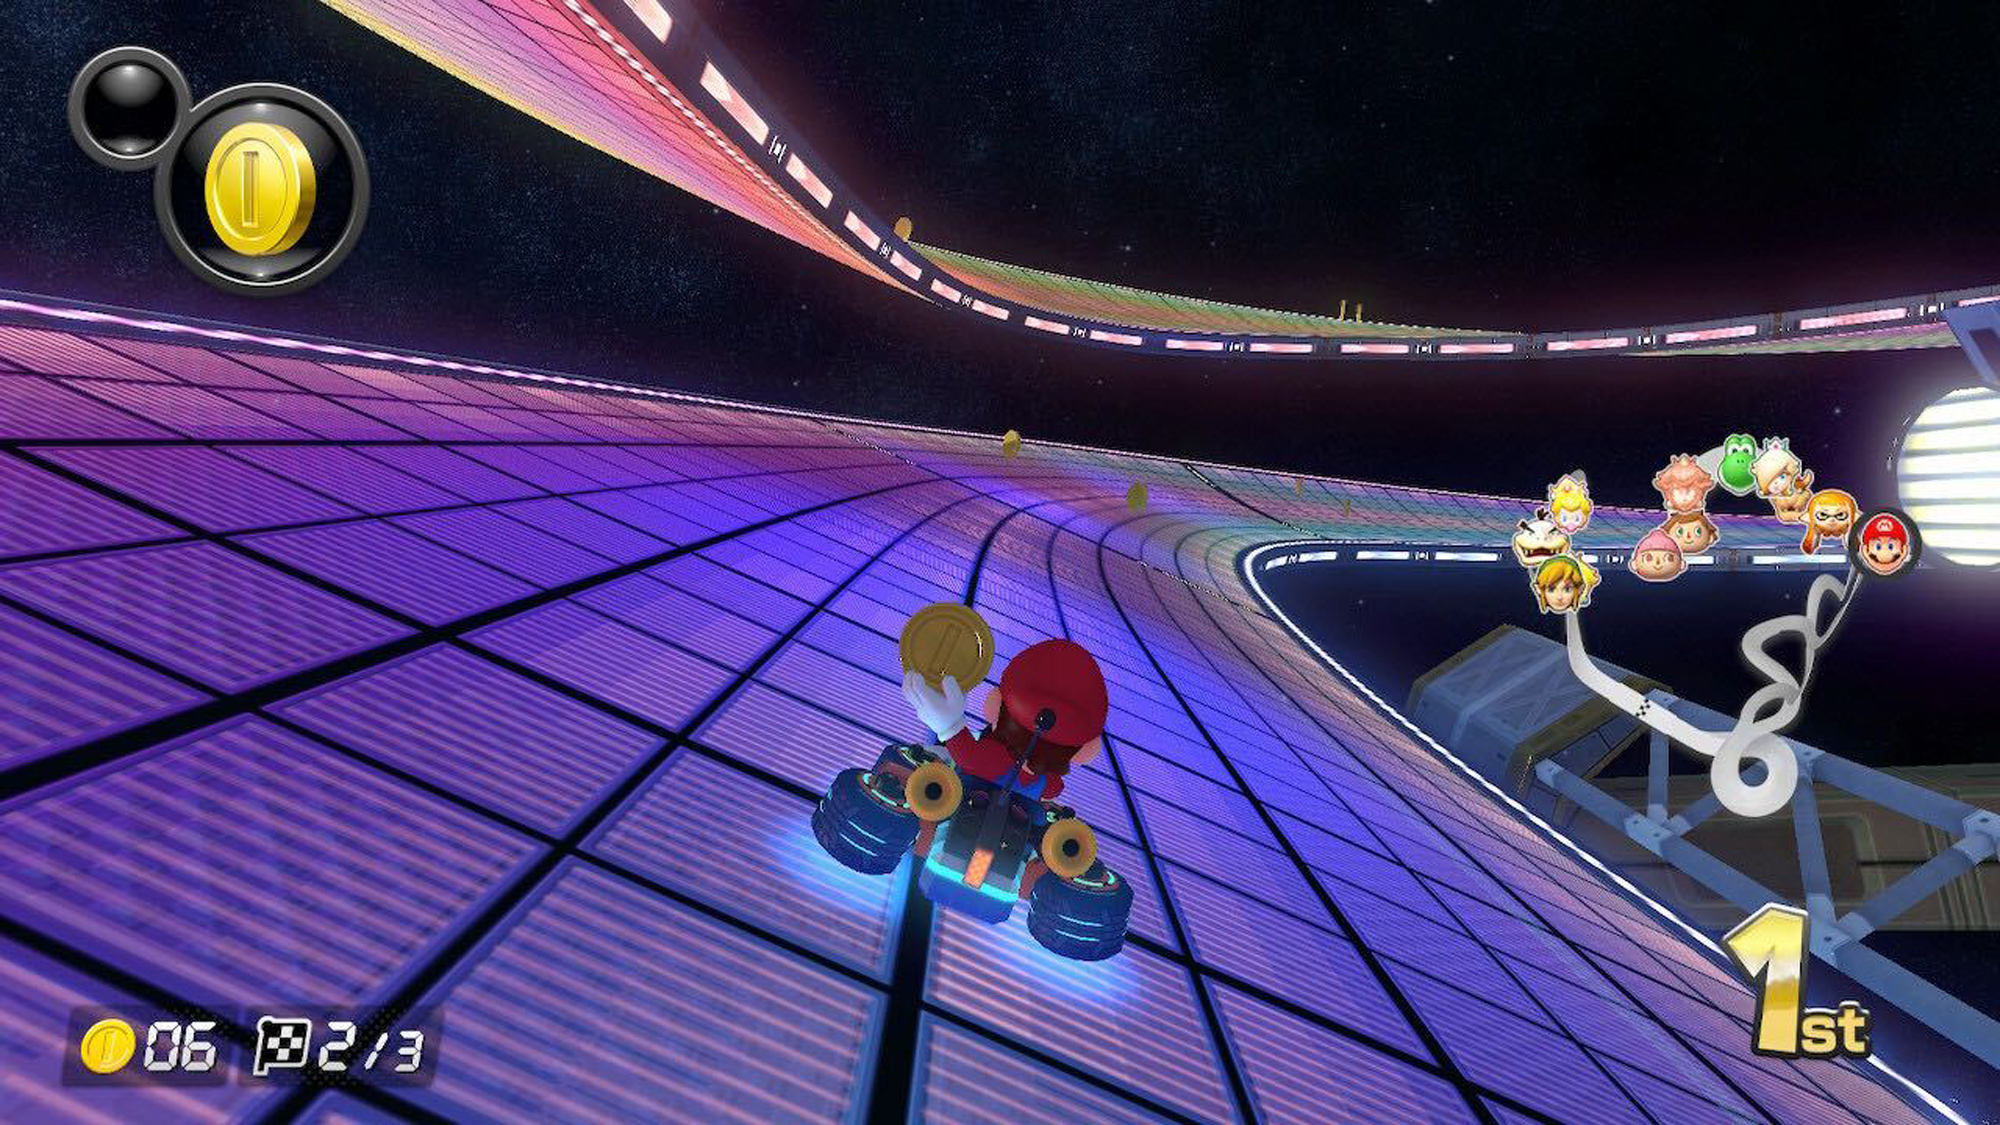 Could Mario Kart Teach Us How to Reduce World Poverty and Improve  Sustainability?, The Brink